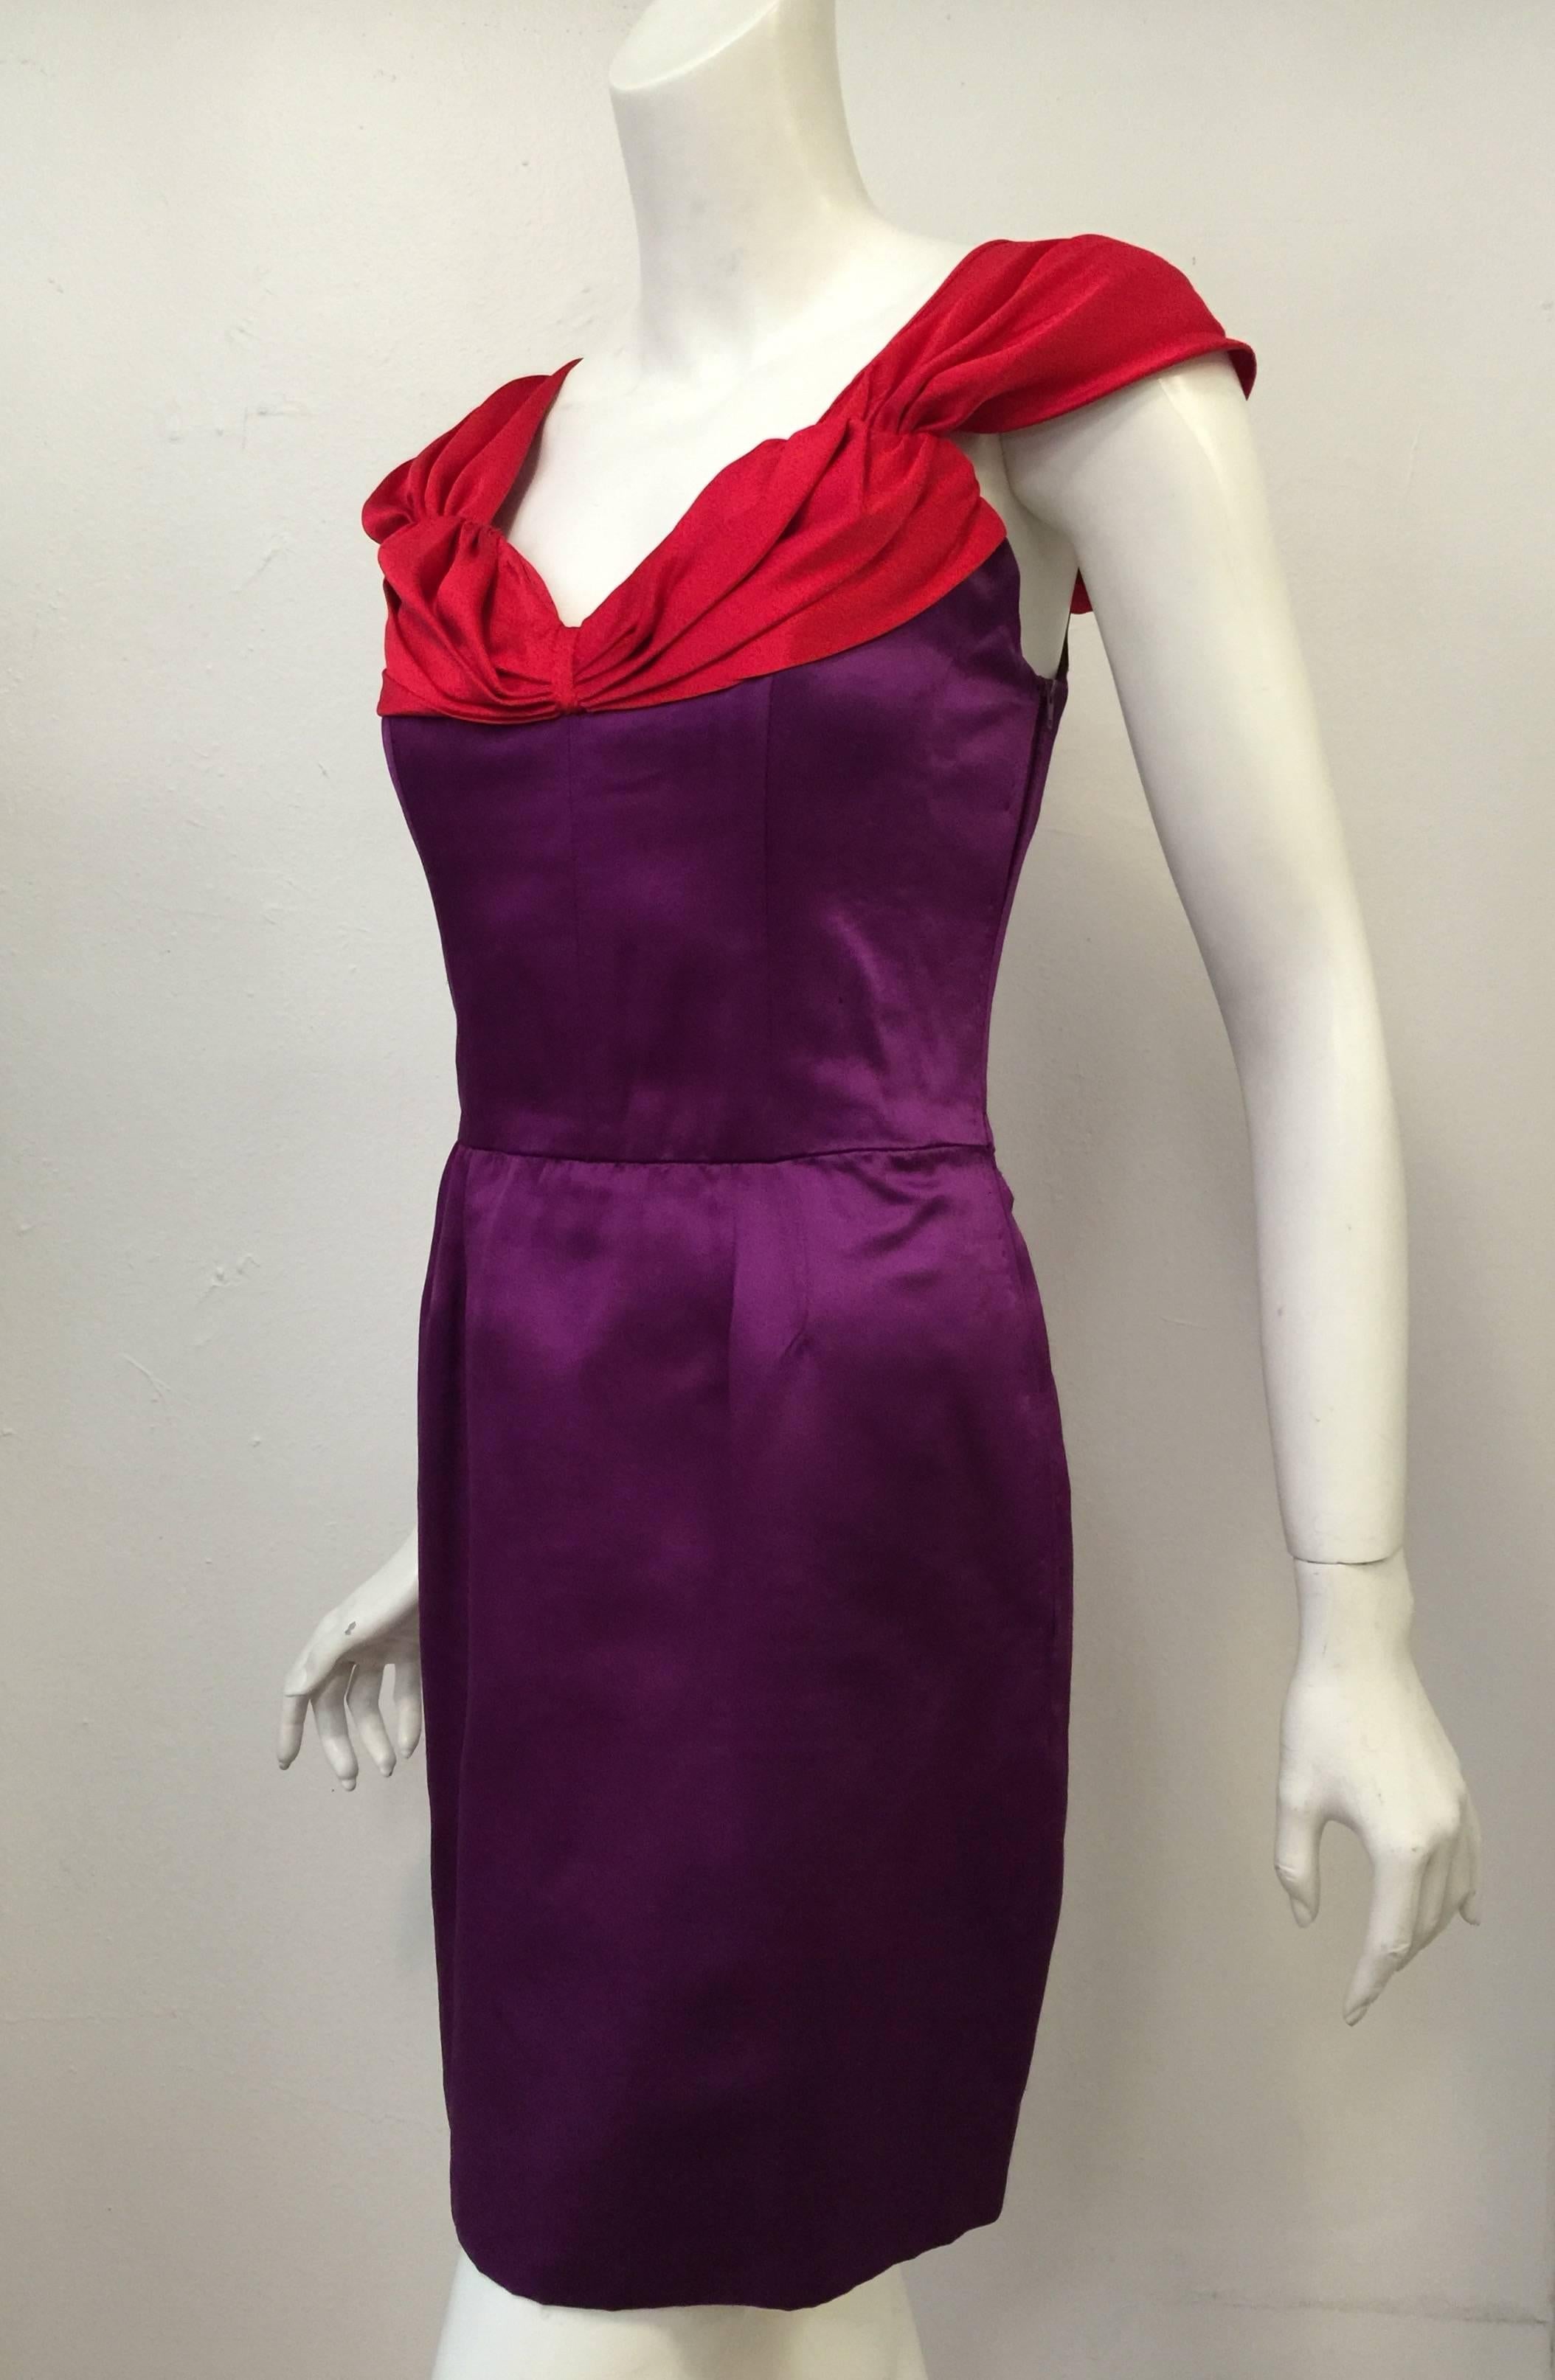 Women's 1990s Lanvin Electric Aubergine and Berry Silk Satin Cap Sleeve Cocktail Dress  For Sale